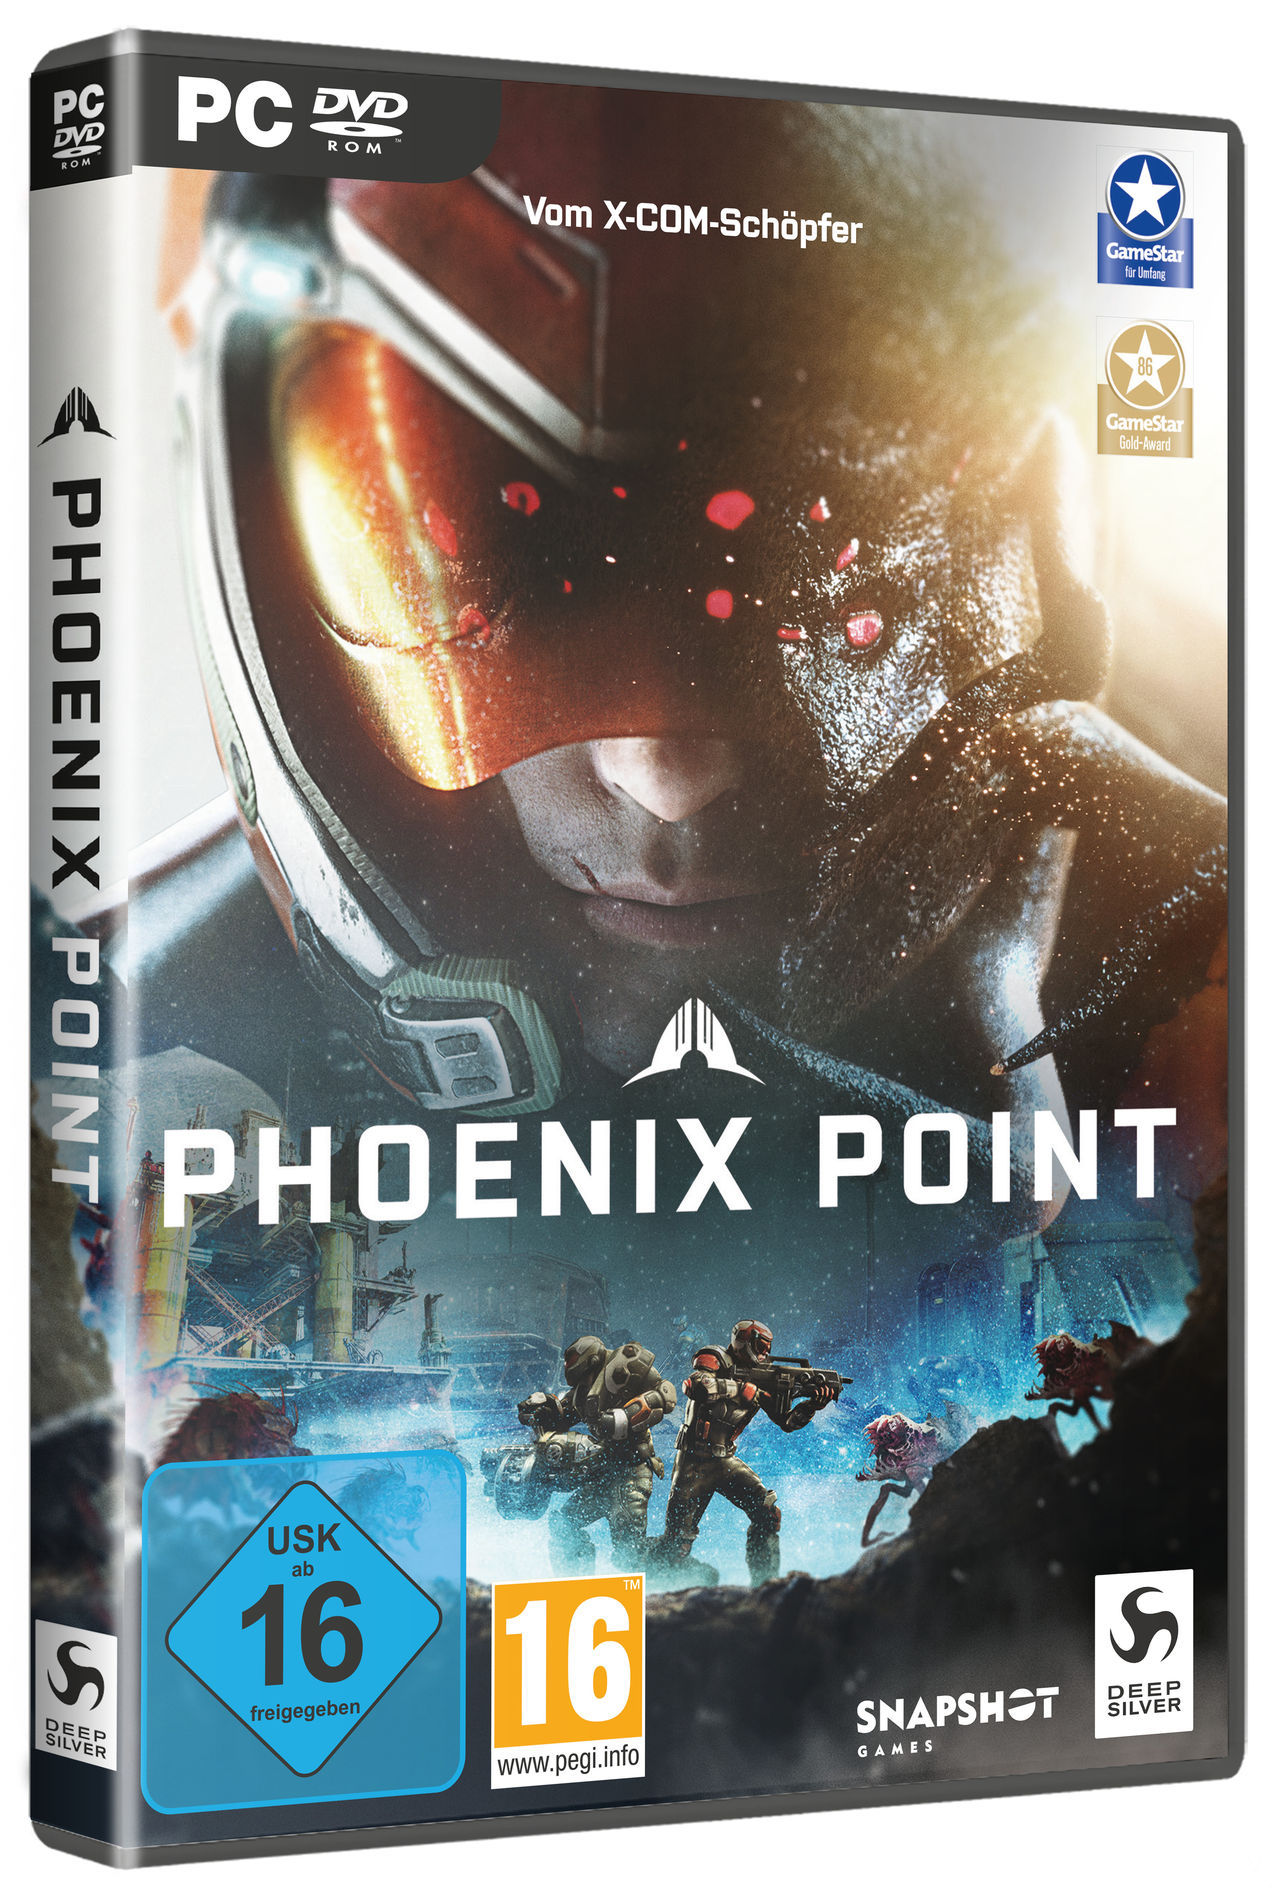 ps4 phoenix point download free